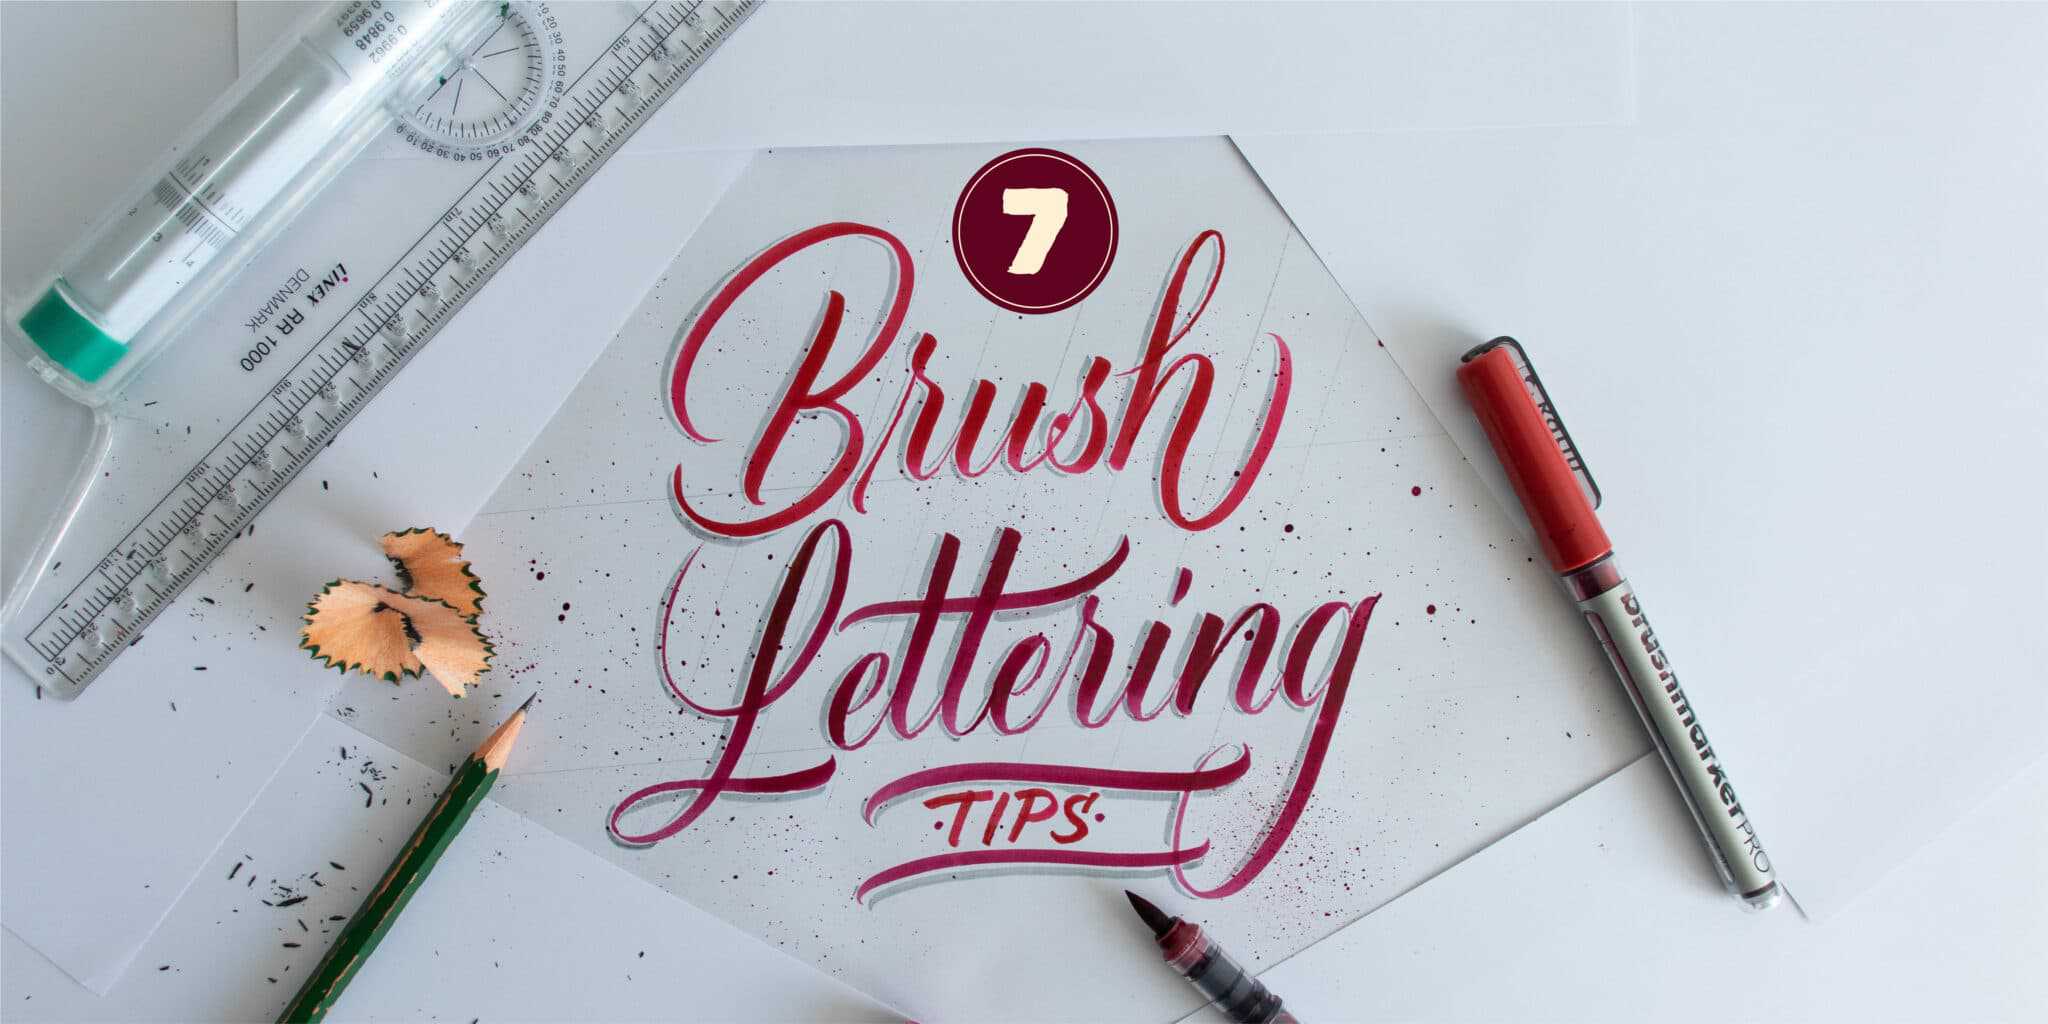 Calligraphy tips and tricks  Hand lettering tutorial, Lettering